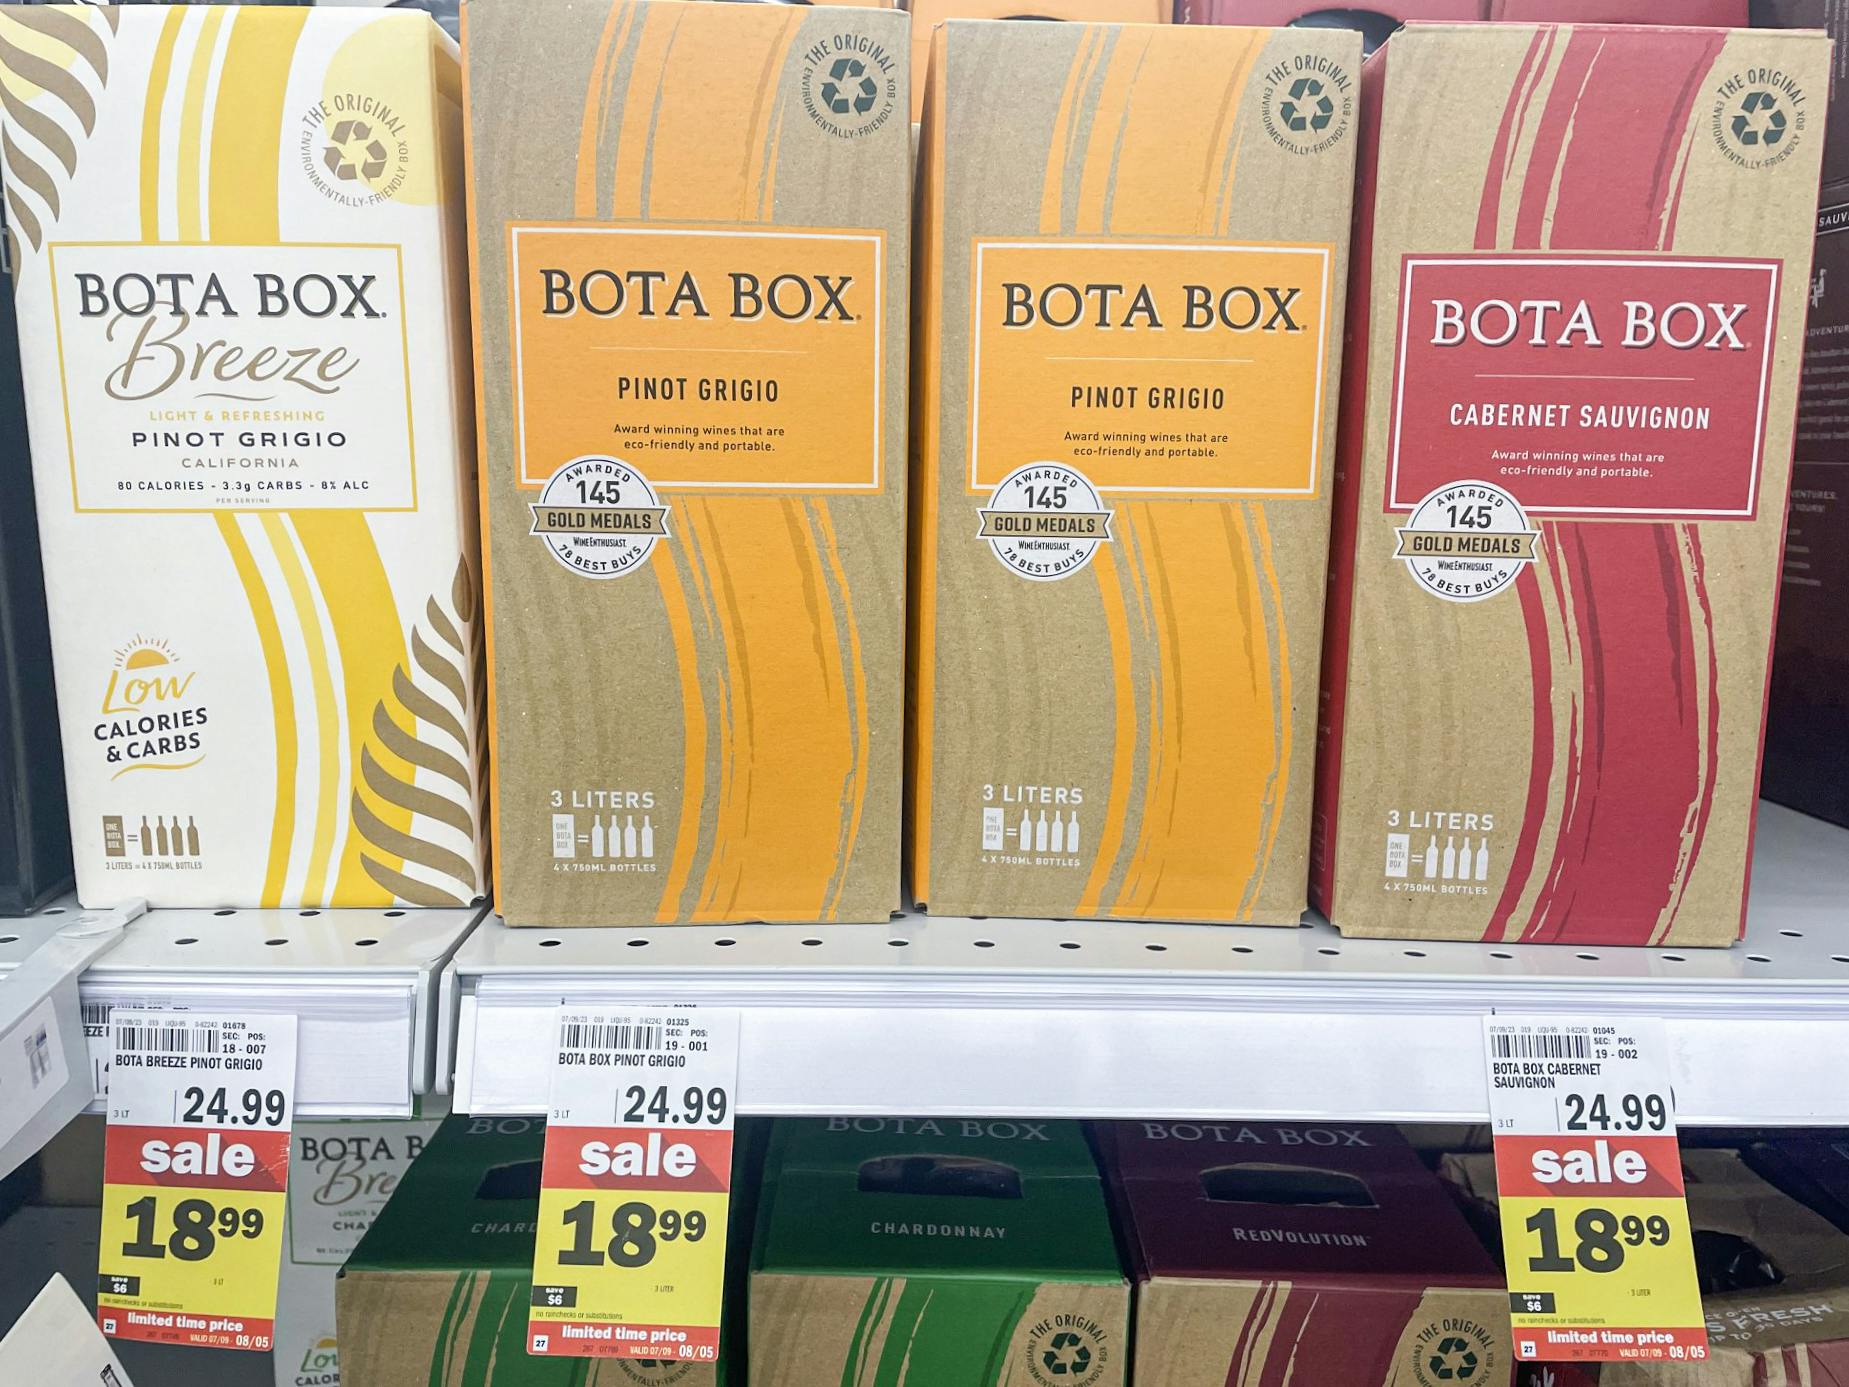 get-bota-box-wine-for-15-99-at-meijer-reg-24-99-the-krazy-coupon